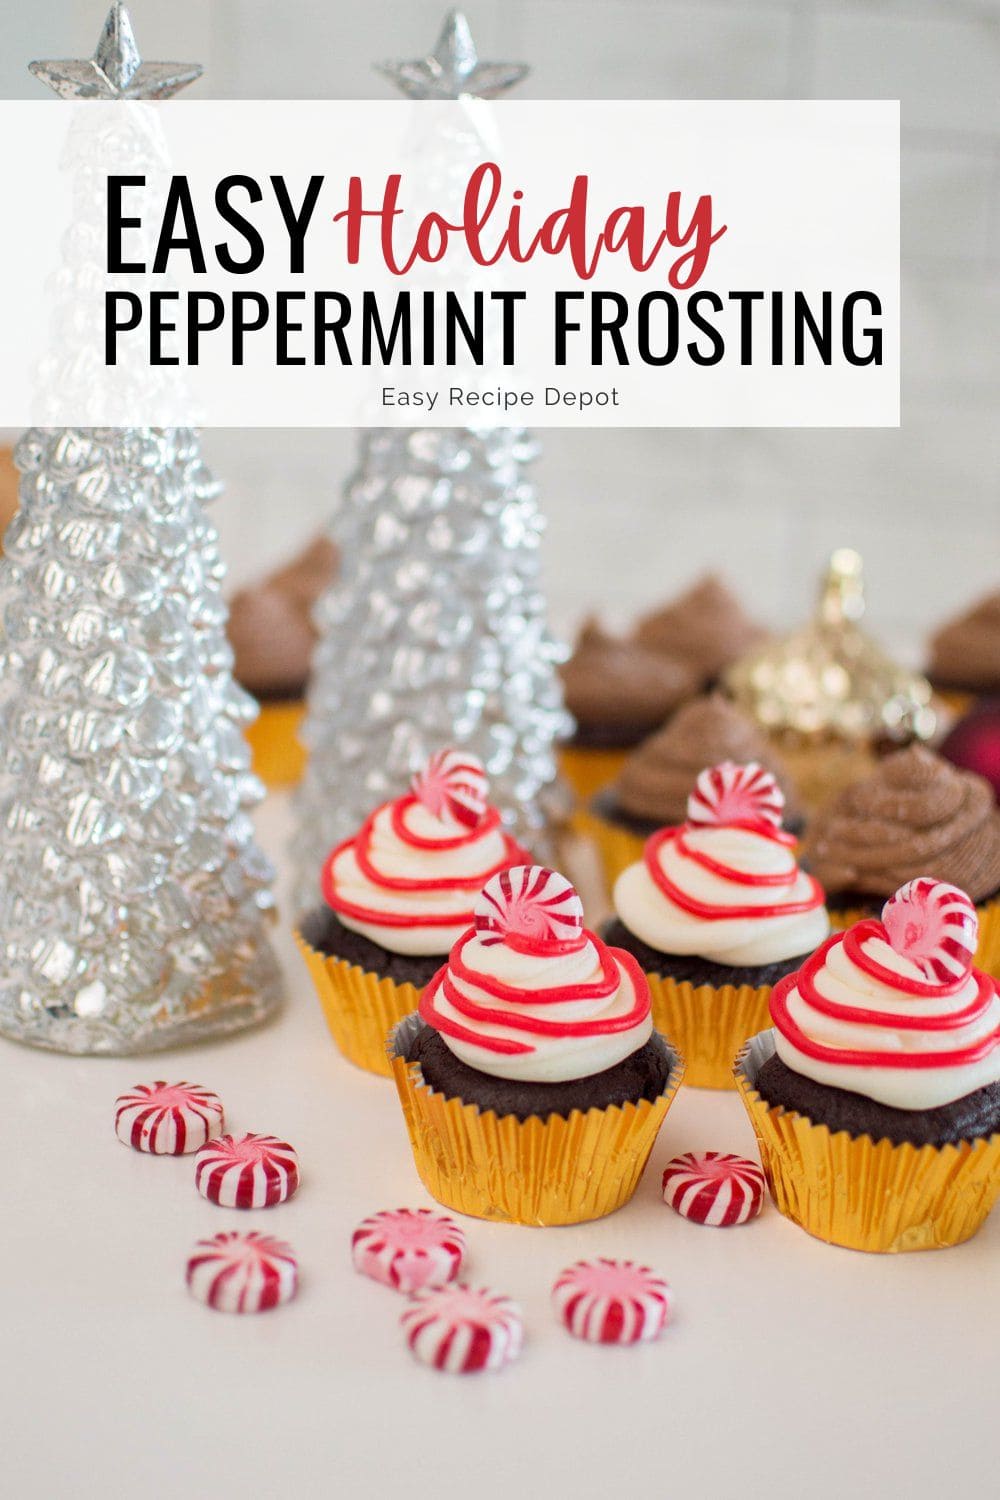 Red and white peppermint frosting on chocolate cupcakes.